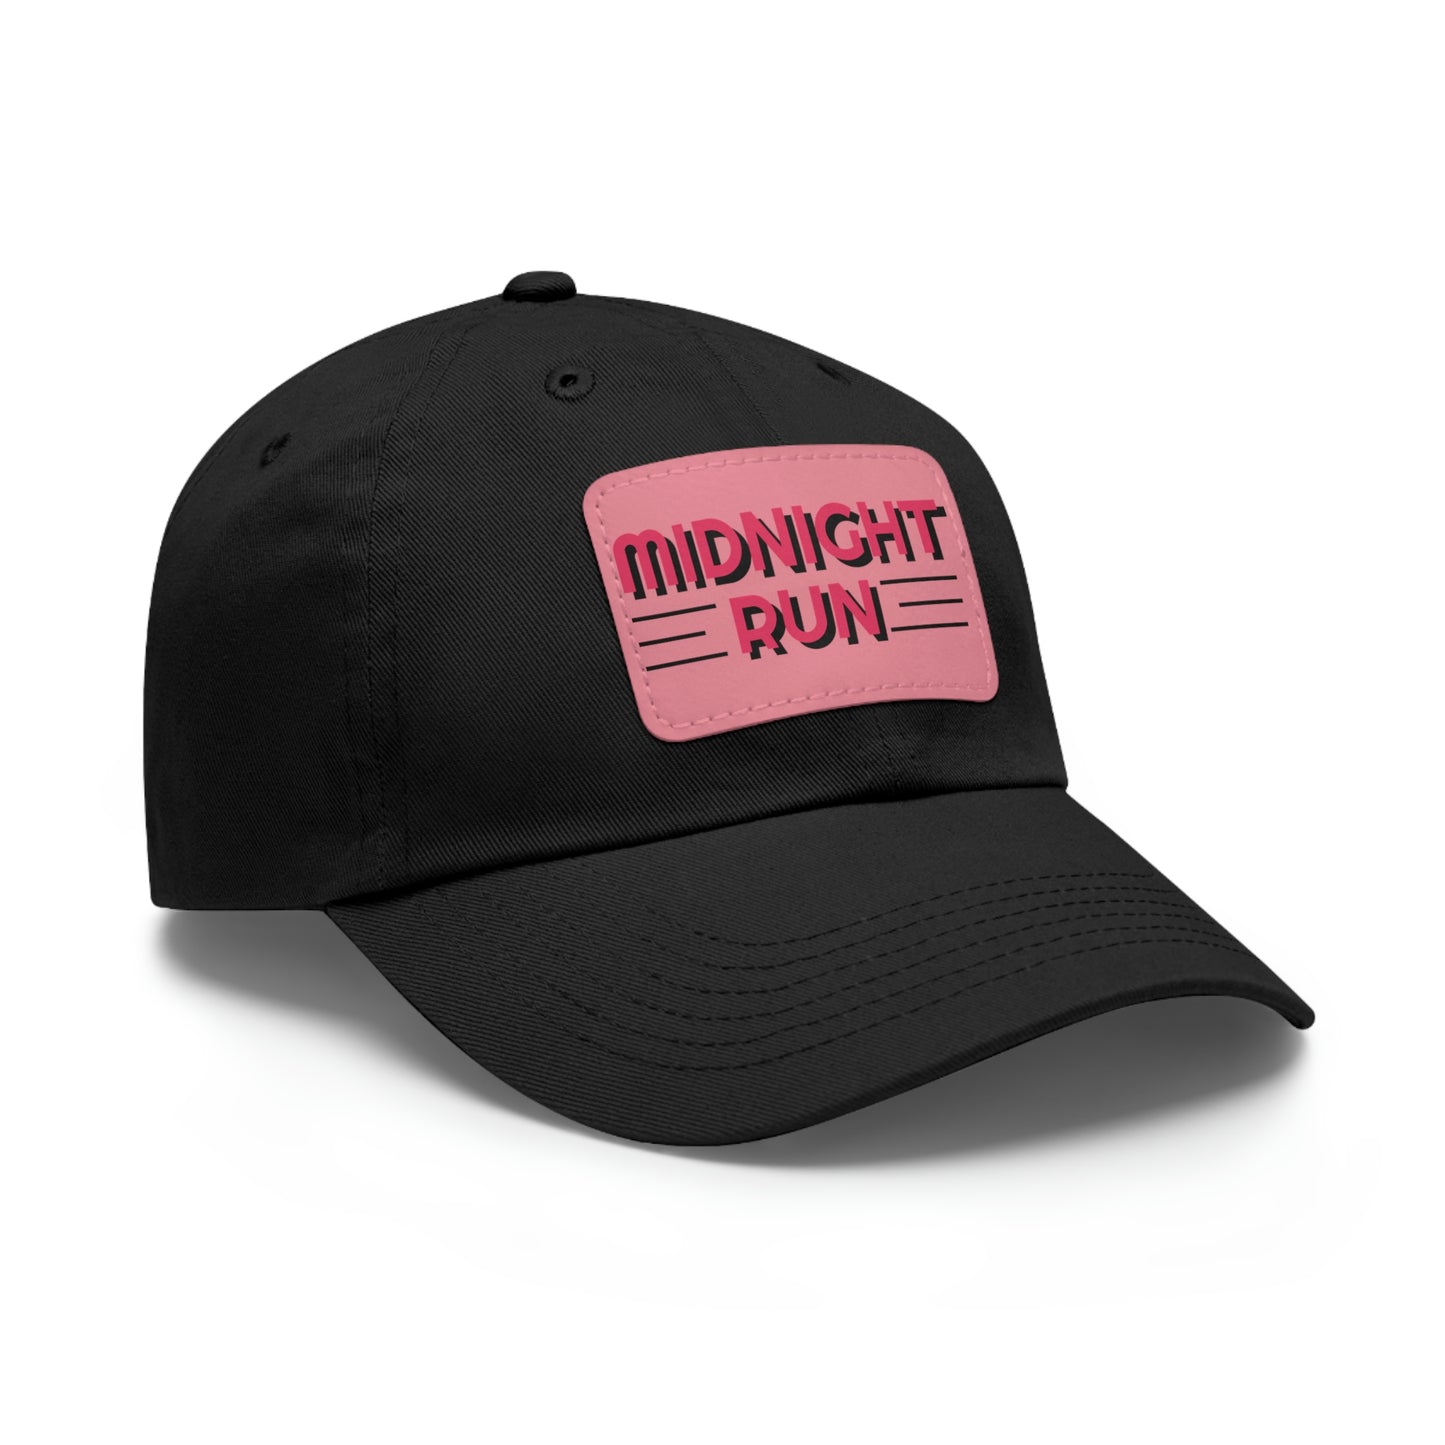 Midnight Run Dad Hat with Leather Patch